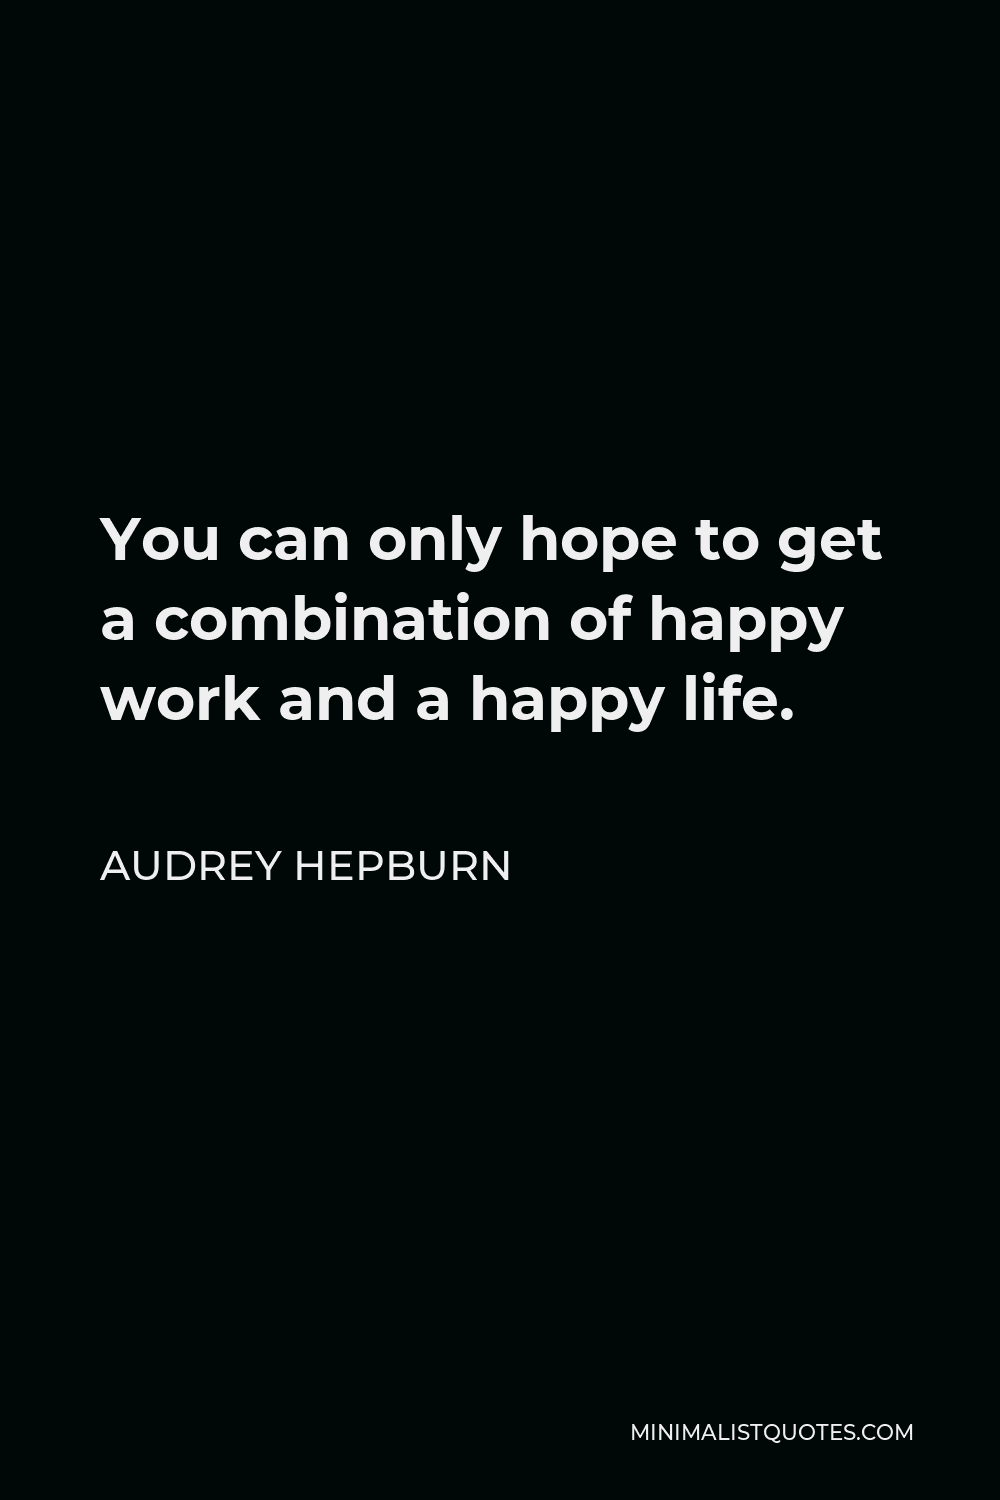 Audrey Hepburn Quote - You can only hope to get a combination of happy work and a happy life.